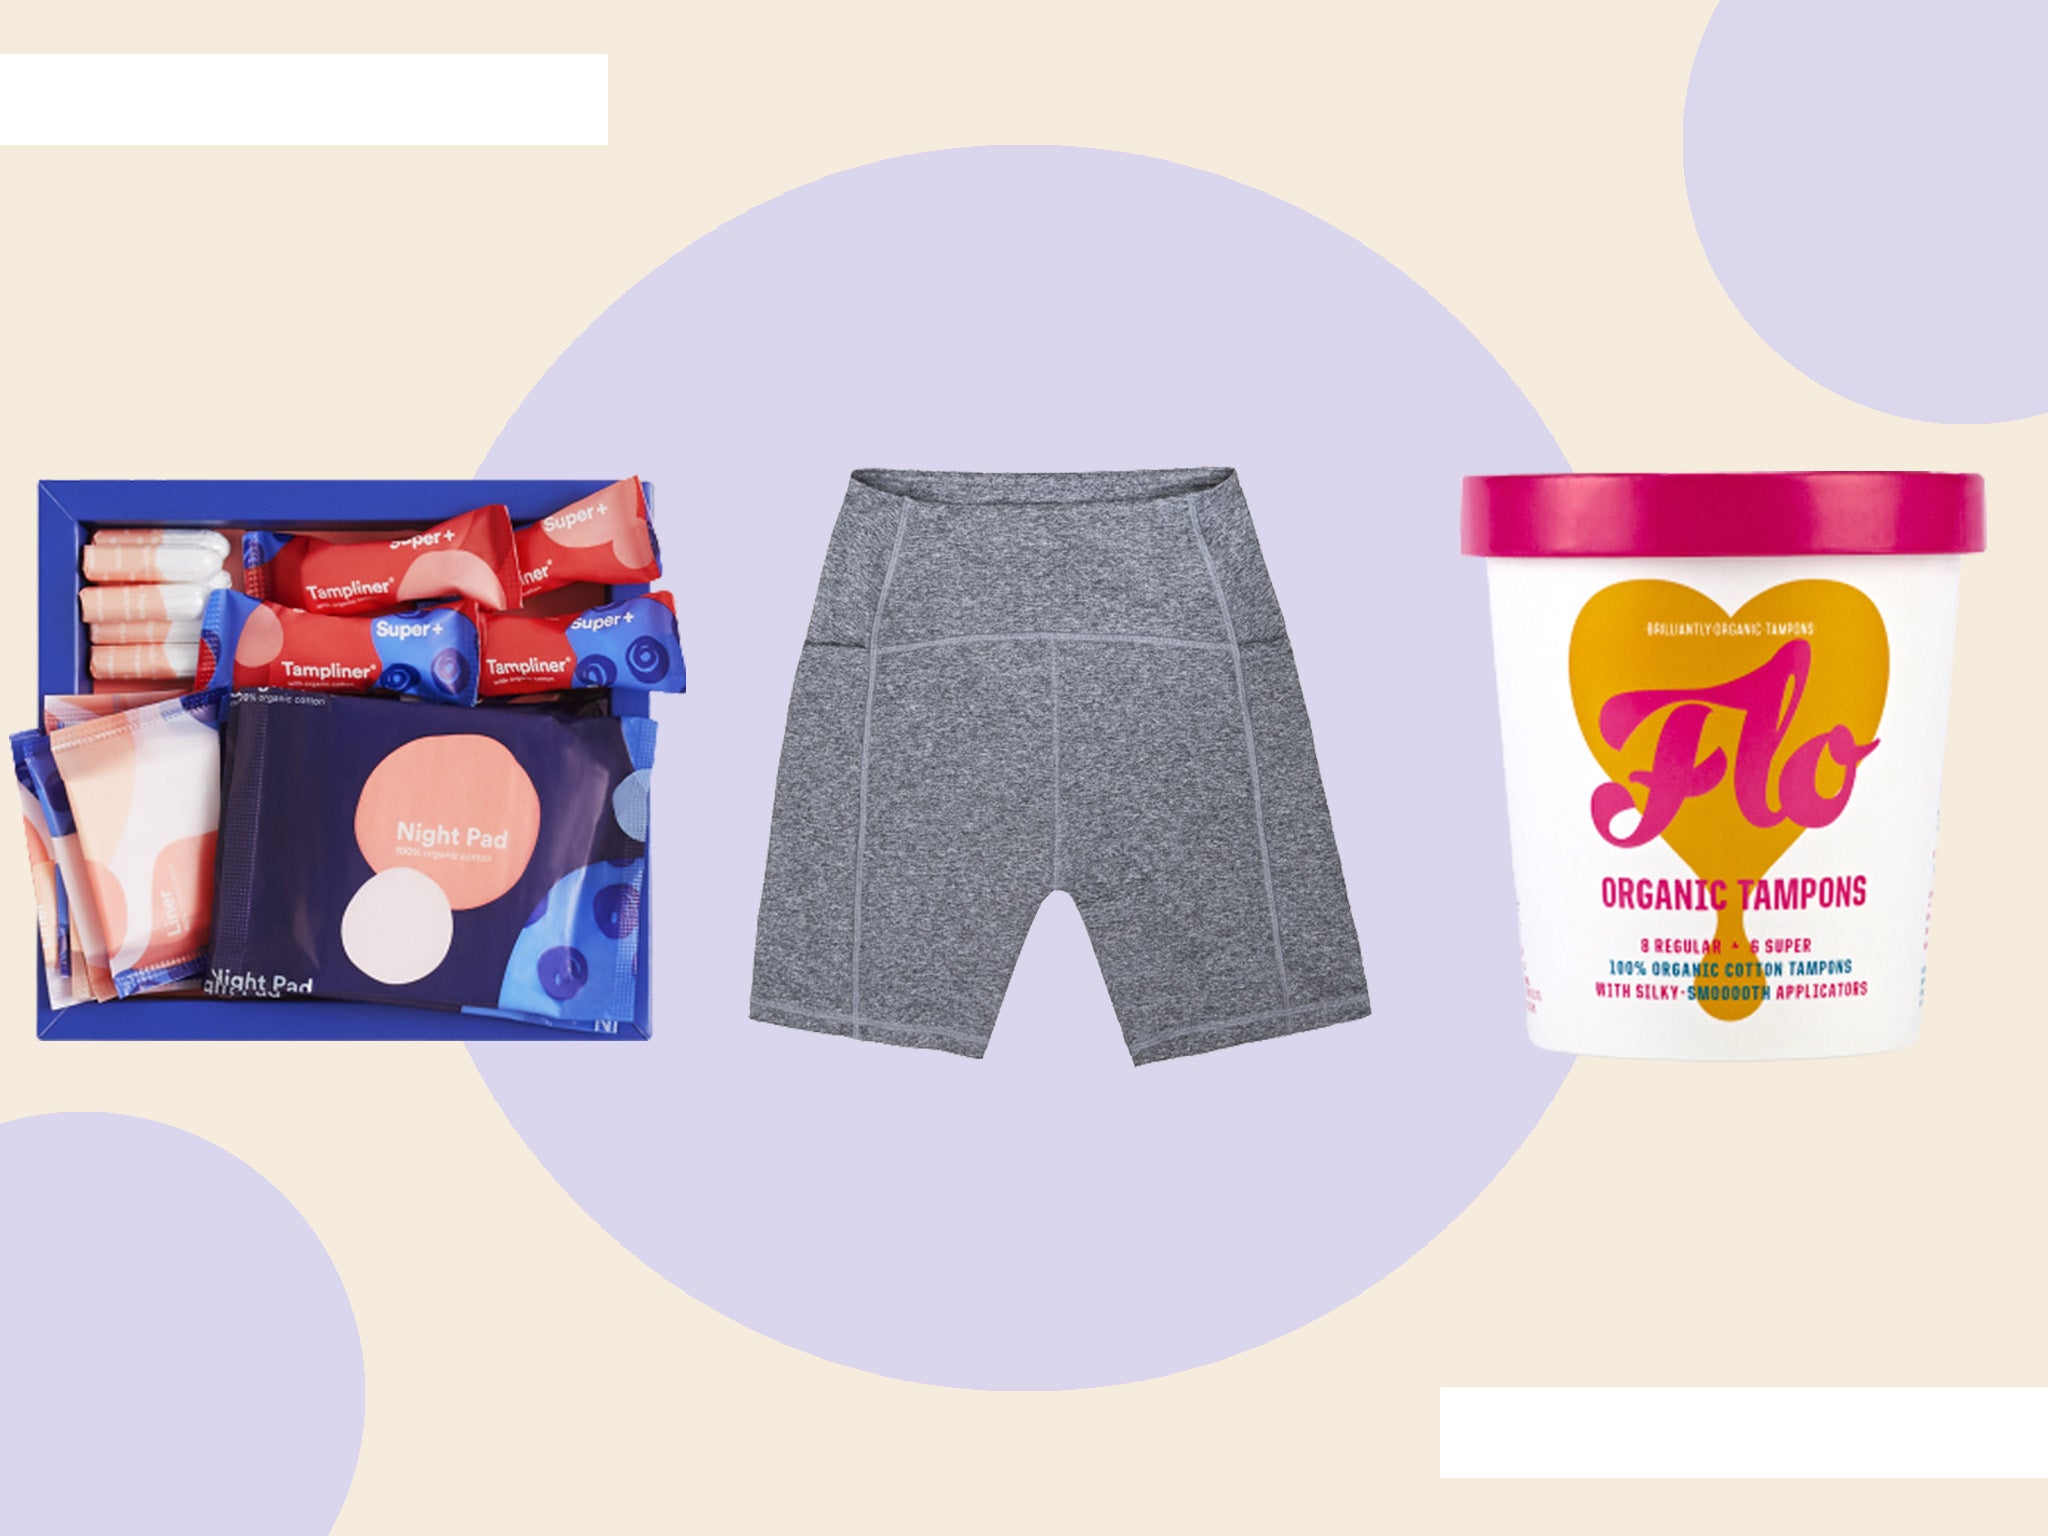 Best sustainable period products 2022: Sanitary pads, tampons and